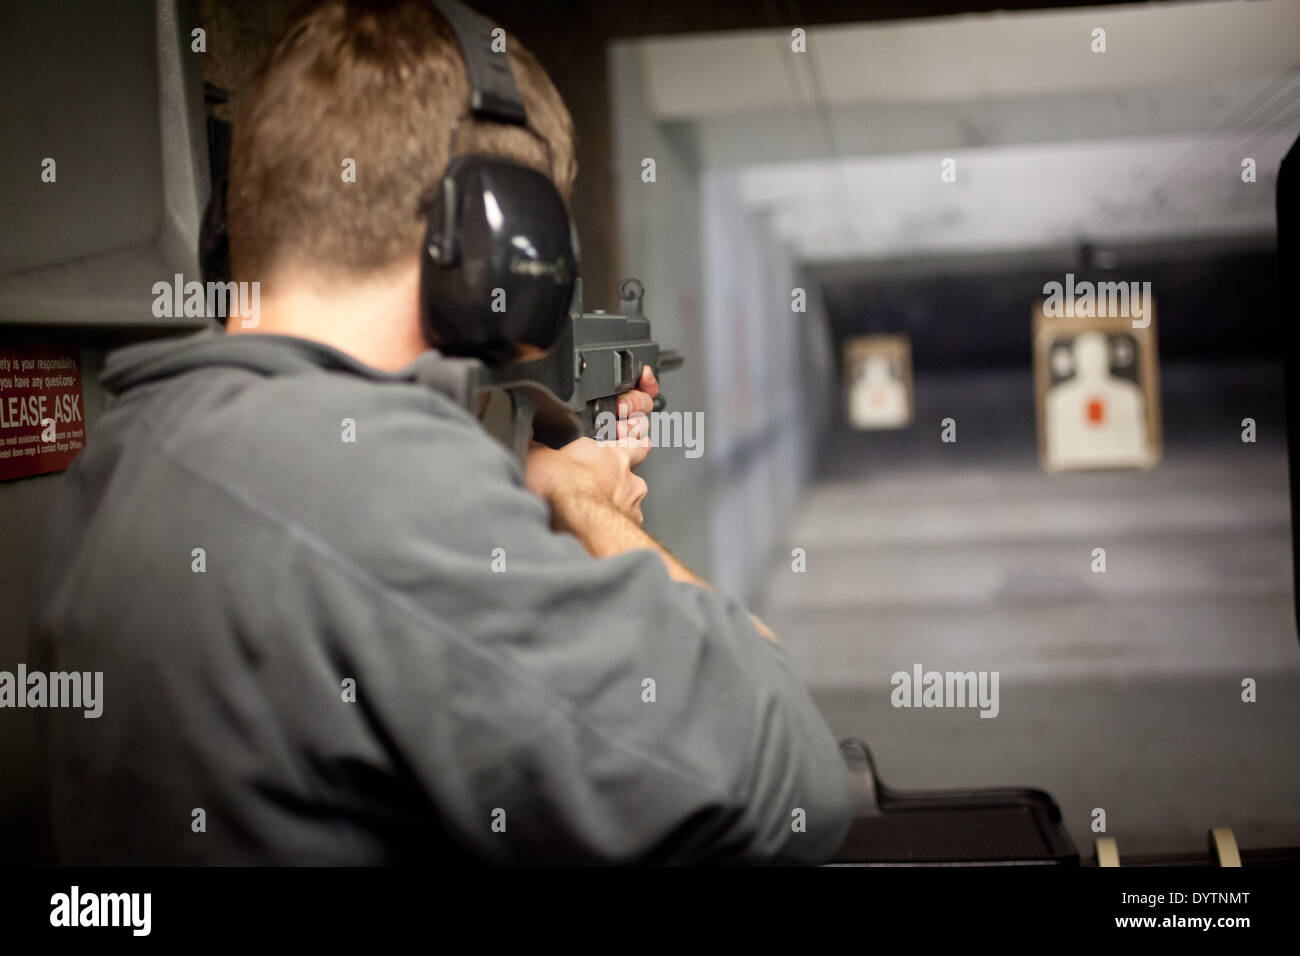 Man at a shooting range aiming at targets with a rifle made by the German defense manufacturing company Heckler & Koch, in April 2013. Stock Photo